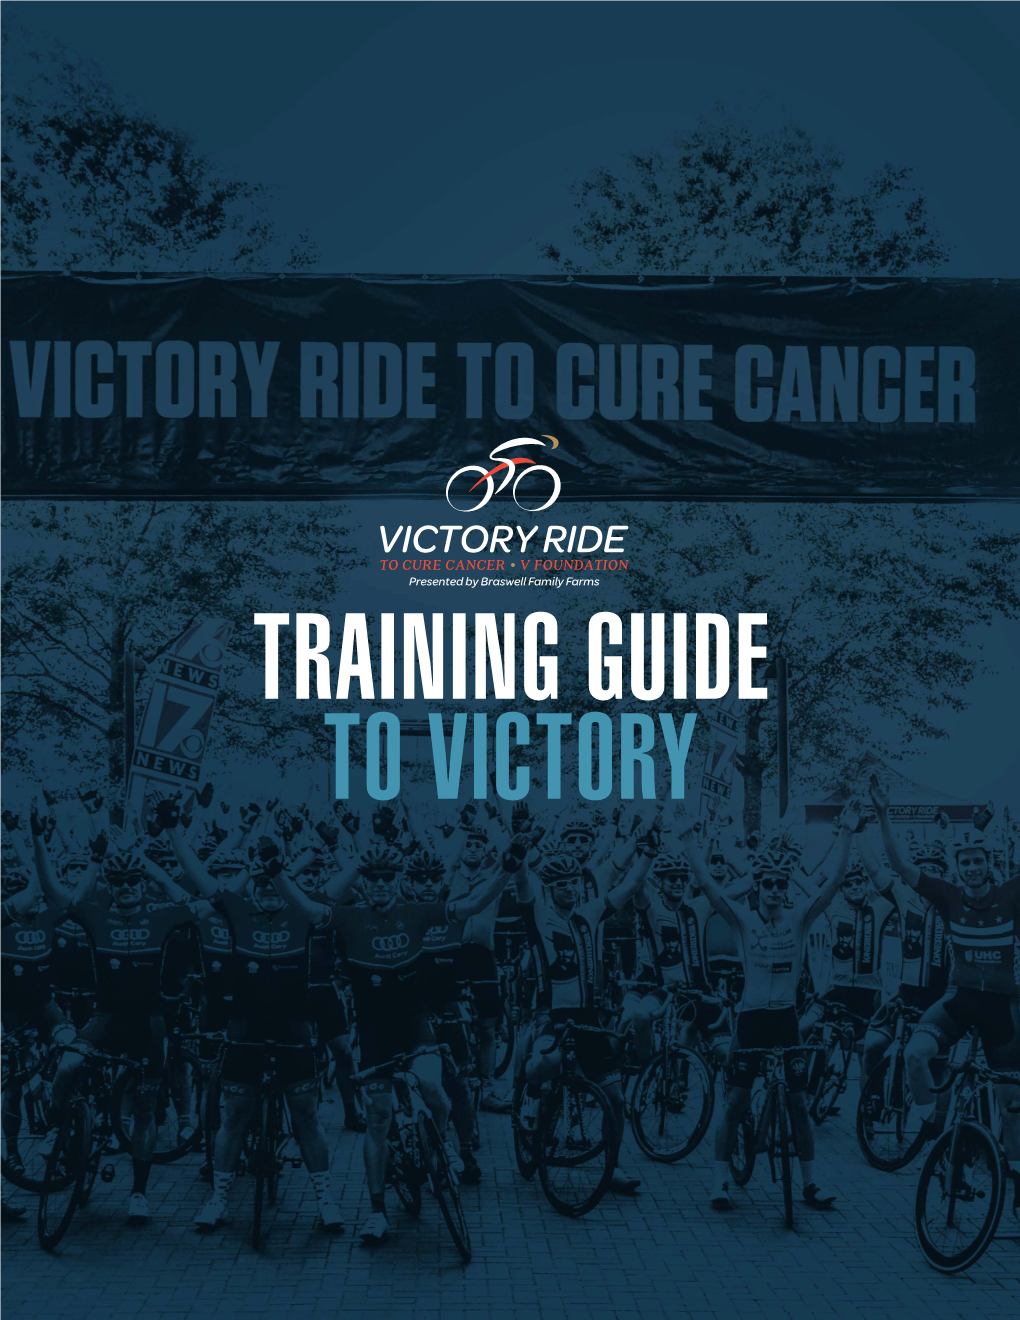 Your Training Guide